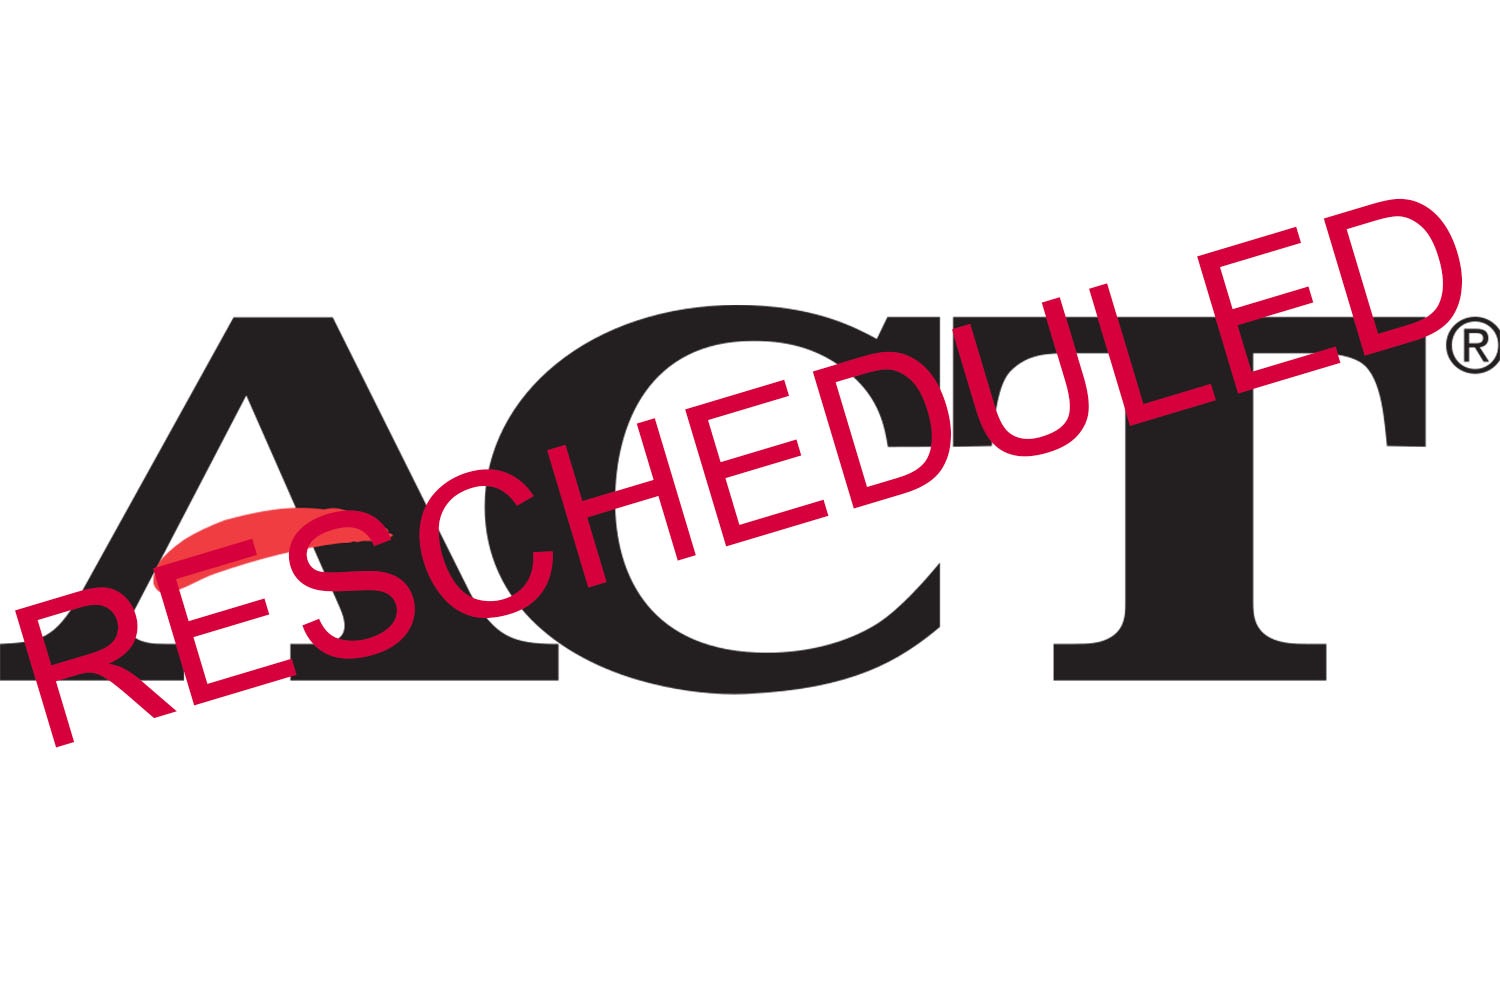 ACT rescheduled for June 13